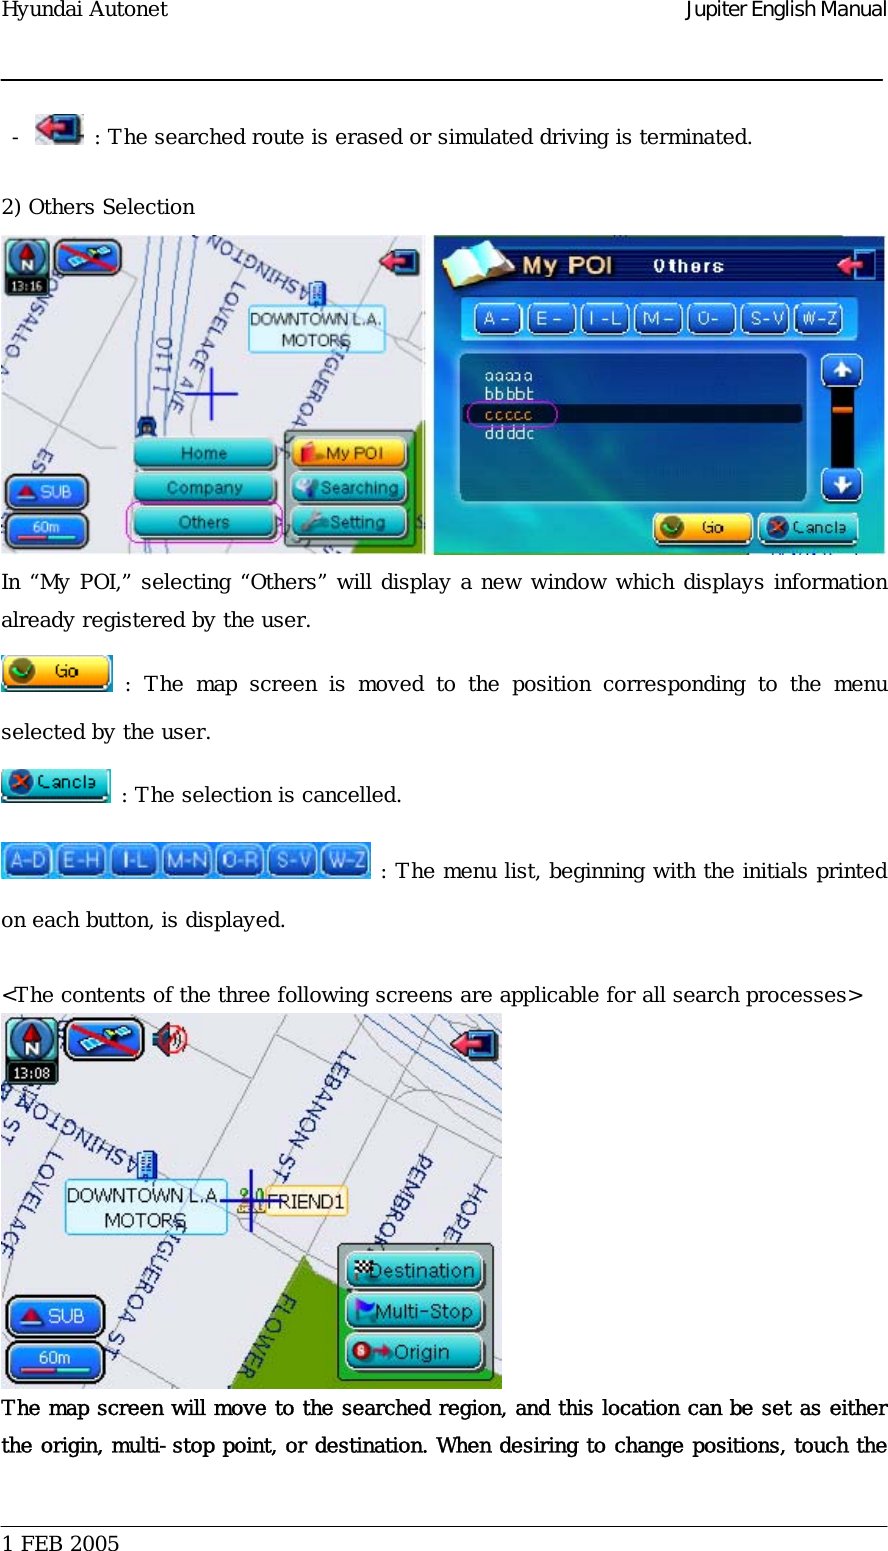 Hyundai Autonet    Jupiter English Manual  -   : The searched route is erased or simulated driving is terminated.   2) Others Selection  In “My POI,” selecting “Others” will display a new window which displays information already registered by the user.   : The map screen is moved to the position corresponding to the menu selected by the user.   : The selection is cancelled.  : The menu list, beginning with the initials printed on each button, is displayed.   &lt;The contents of the three following screens are applicable for all search processes&gt;  The map screen will move to the searched region, and this location can be set as either the origin, multi-stop point, or destination. When desiring to change positions, touch the  1 FEB 2005    